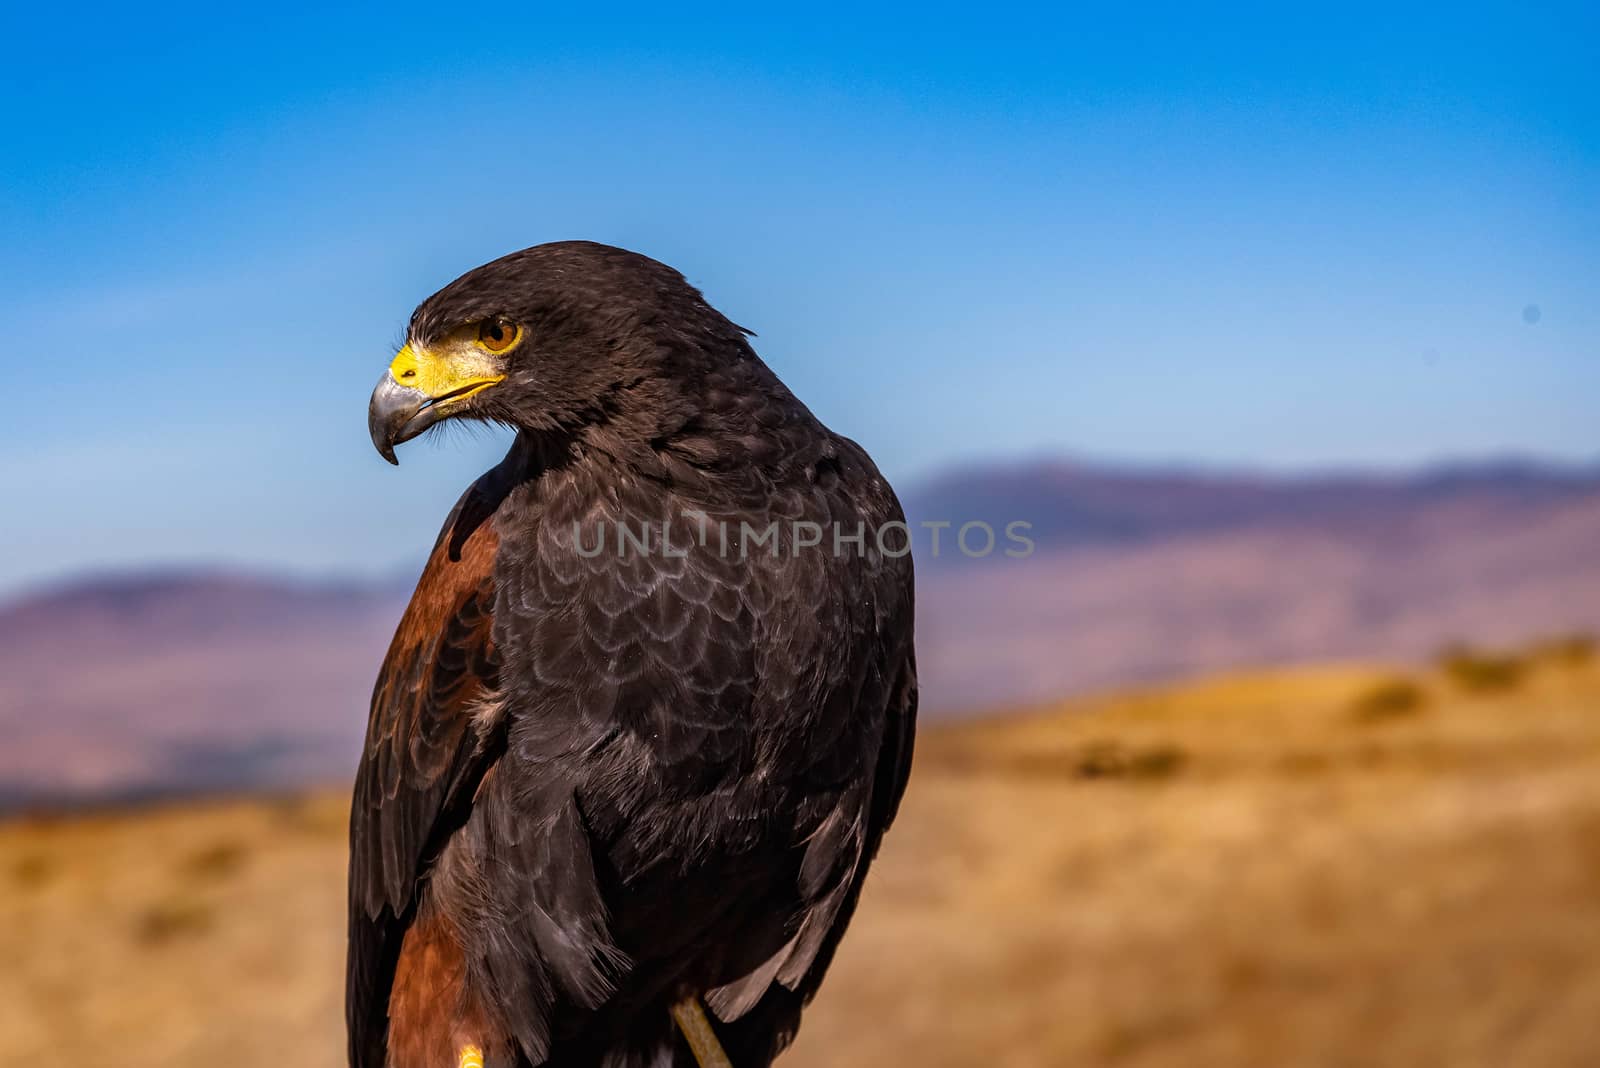 Harris's Hawk looking to the side with a desert background with blue sky.